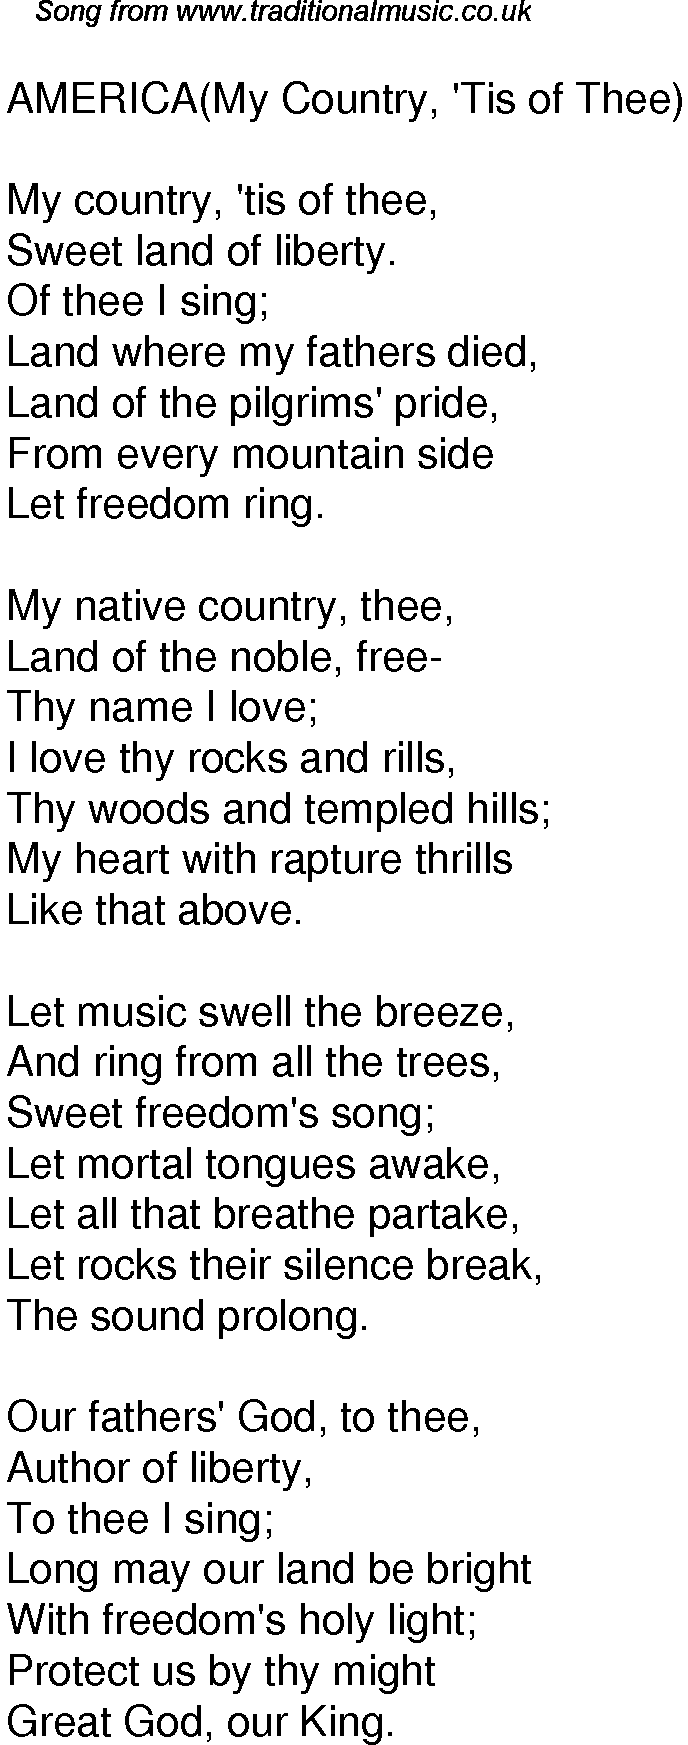 Old Time Song Lyrics For 59 America My Country Tis Of Thee Let freedom ring, for the children of every generation may the love of freedom always ring; traditional music library